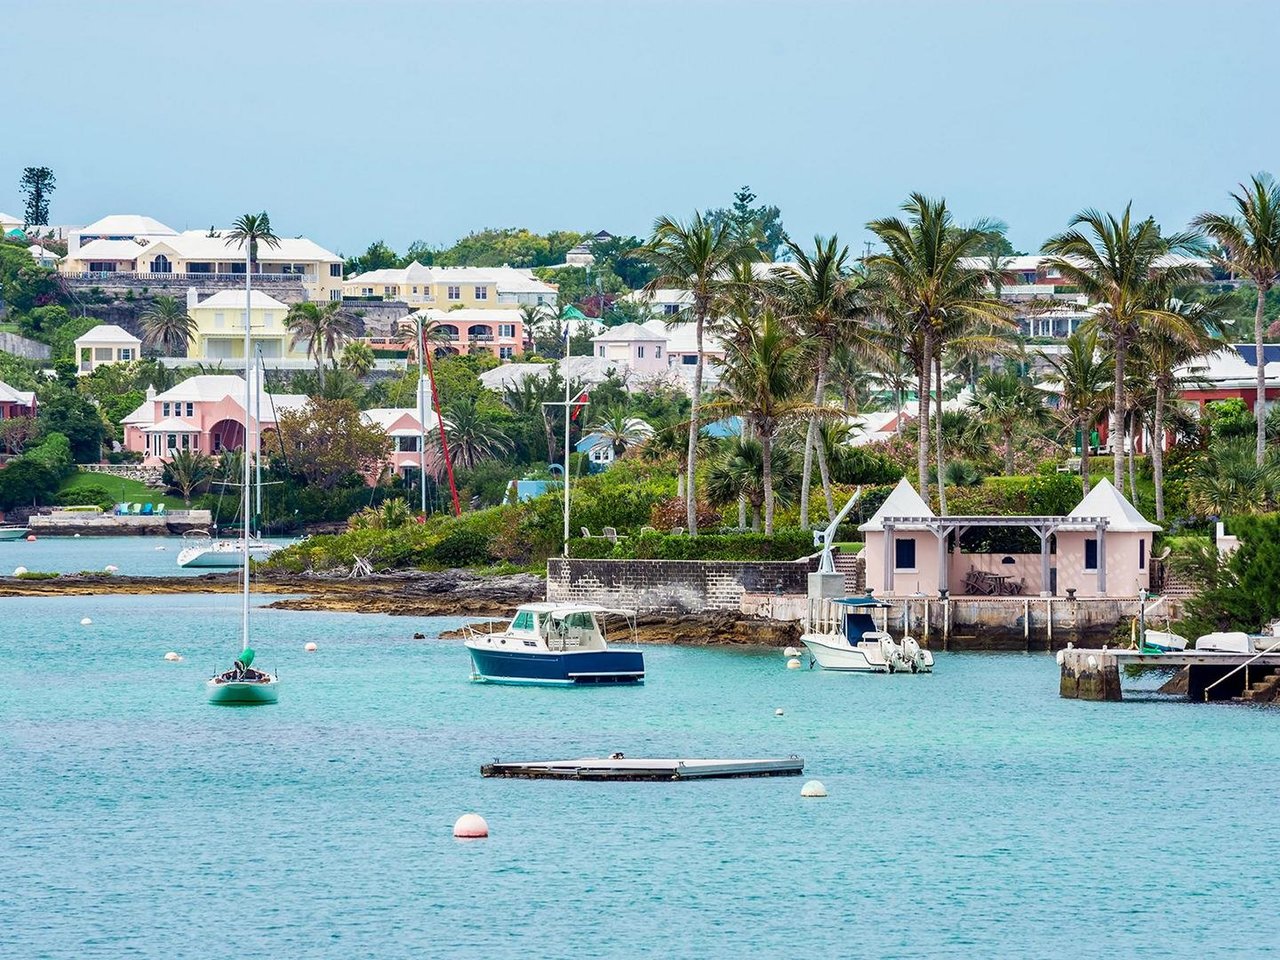 Bermuda should open up to foreign capital, experts say